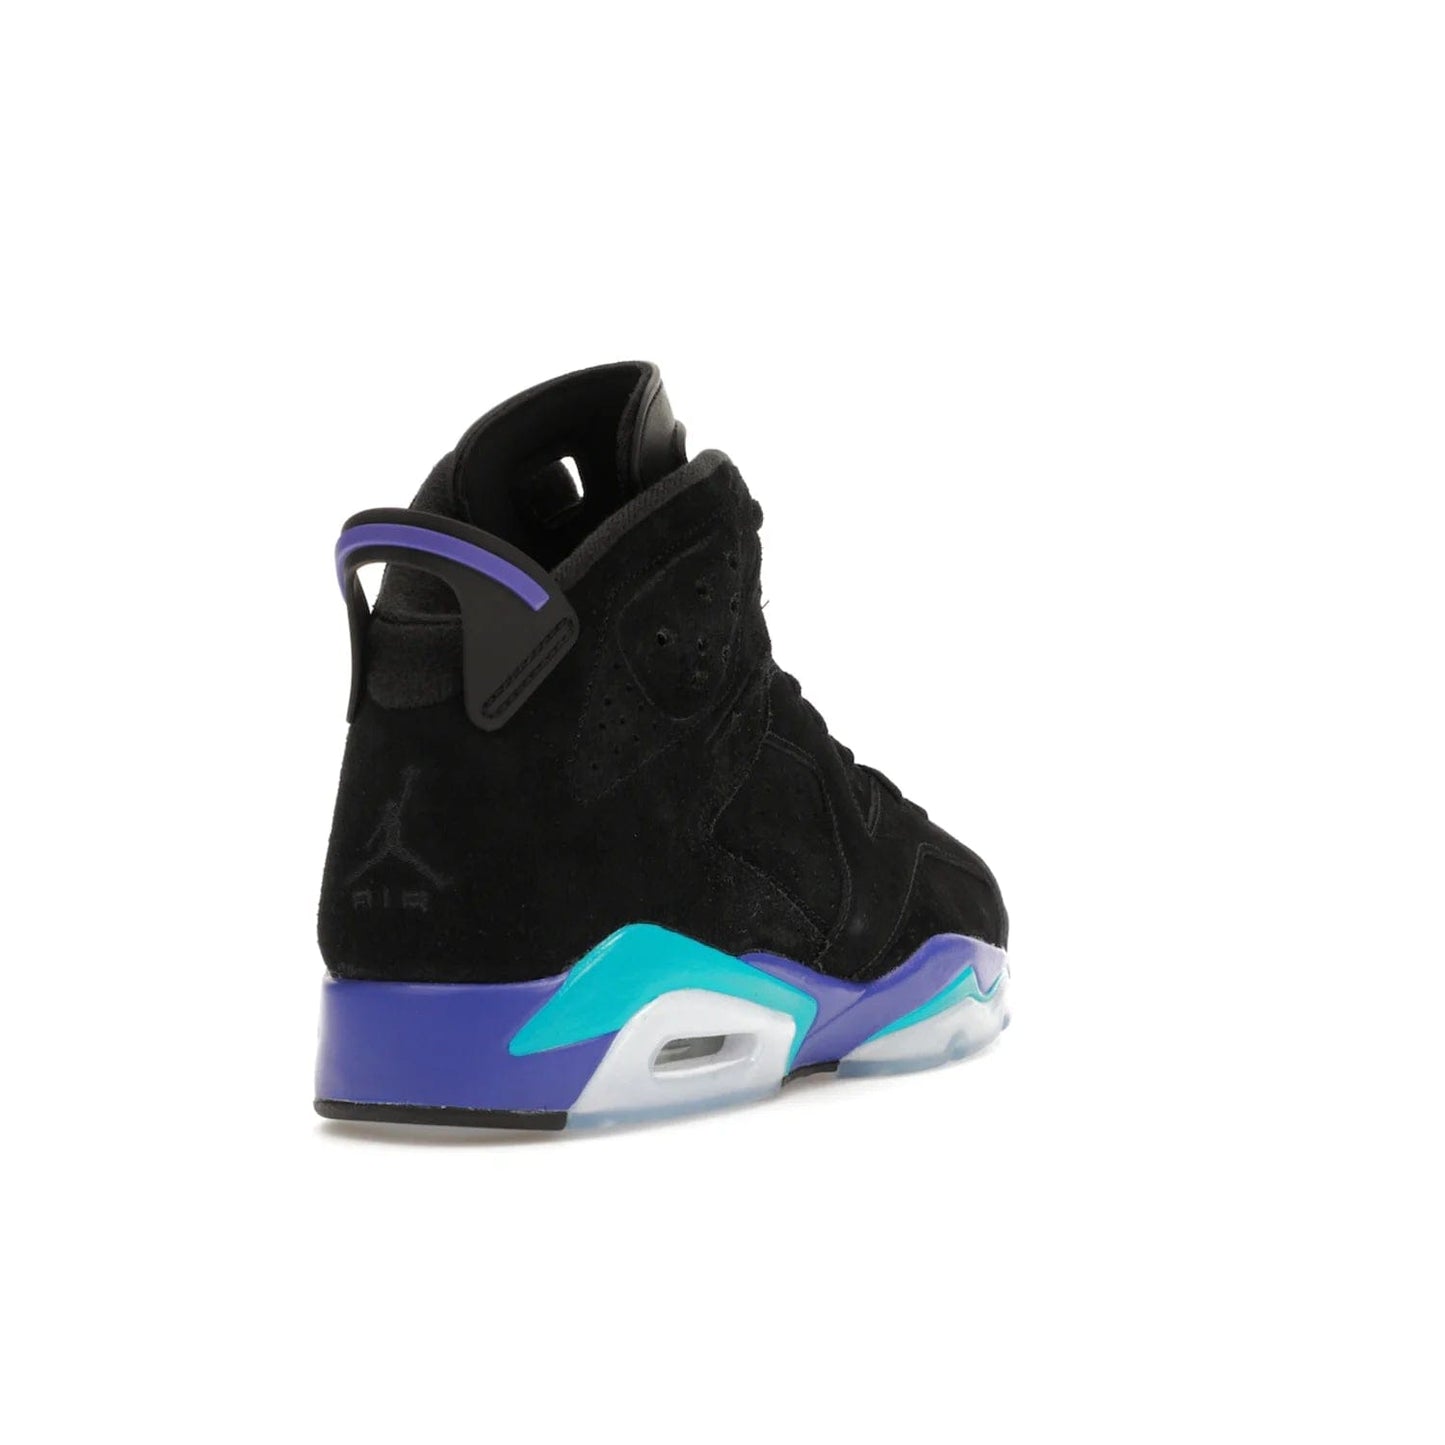 Jordan 6 Retro Aqua - Image 31 - Only at www.BallersClubKickz.com - Feel the classic Jordan 6 Retro Aqua paired with modern style. Black, Bright Concord, and Aquatone hues are crafted with a supple suede and rubberized heel tab. This standout sneaker adds signature Jordan elements at $200. Elevate your style with the Jordan 6 Retro Aqua.